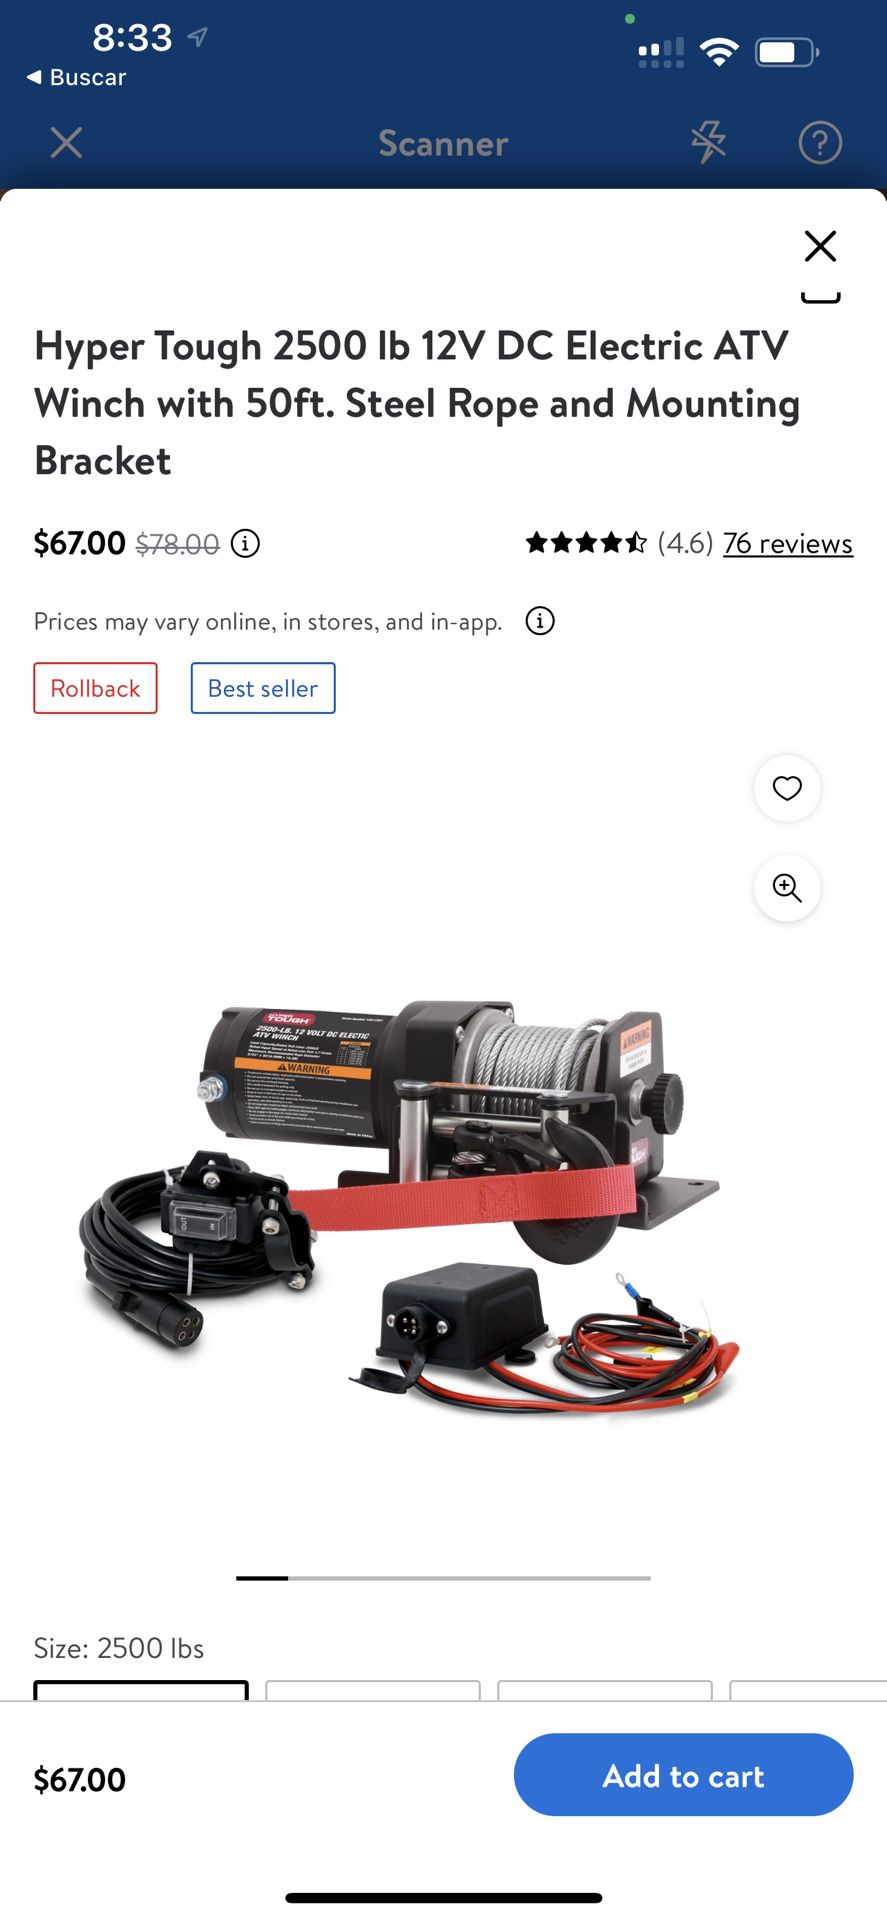 Hyper Tough 2500 Ib 12V DC Electric ATV Winch with 50ft. Steel Rope and Mounting Bracket $55